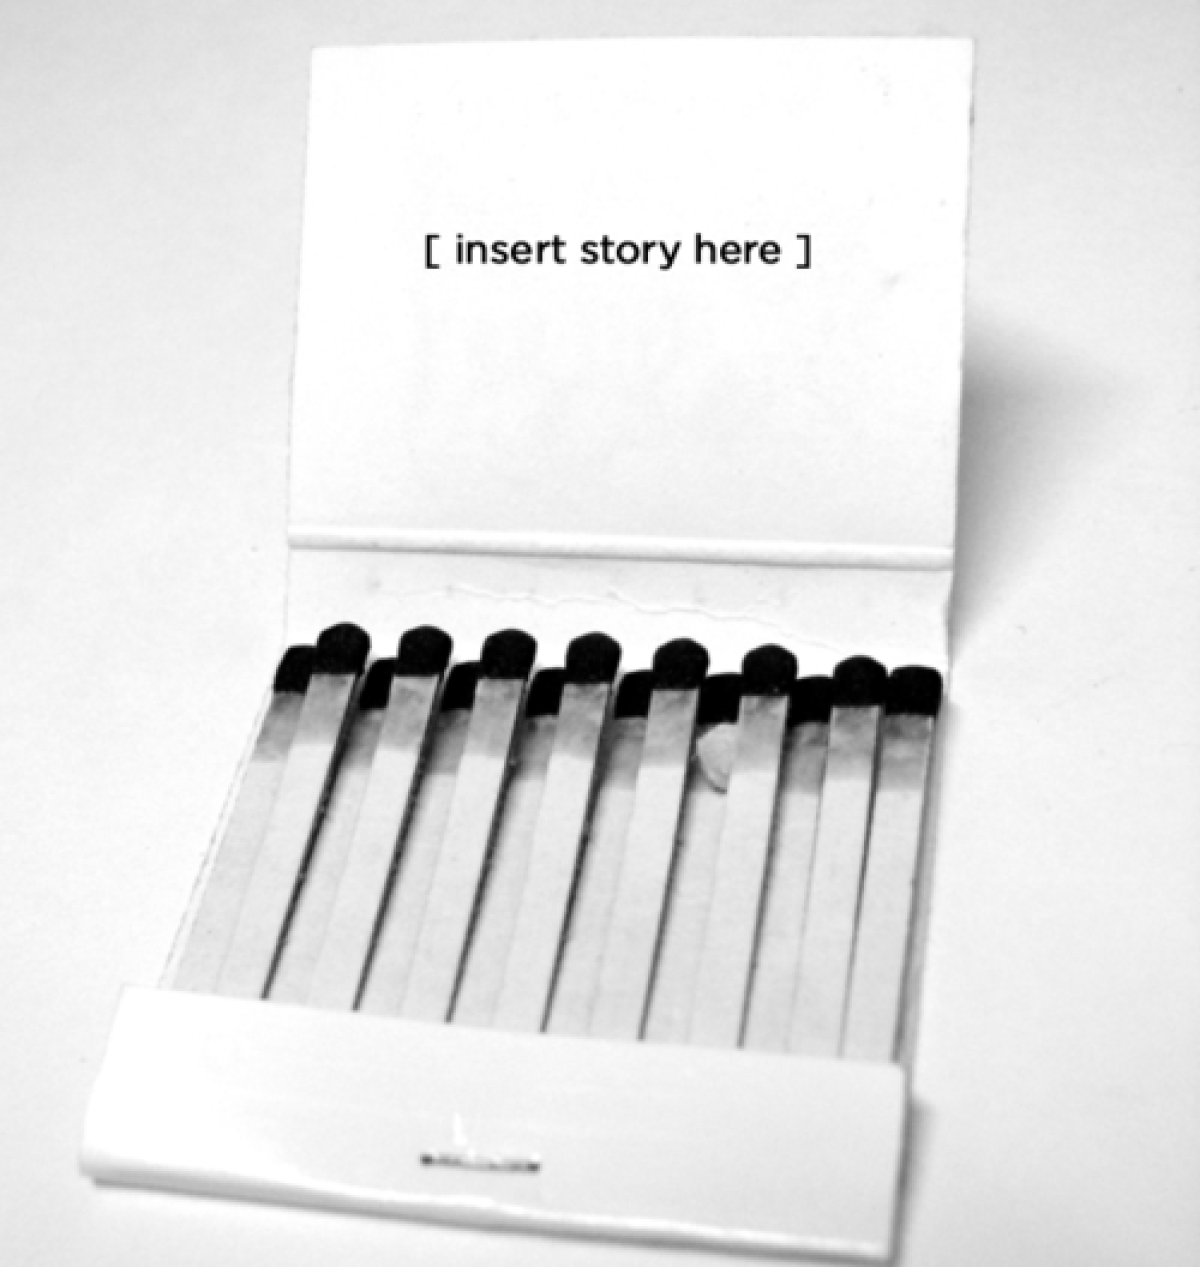 matchbook story contest